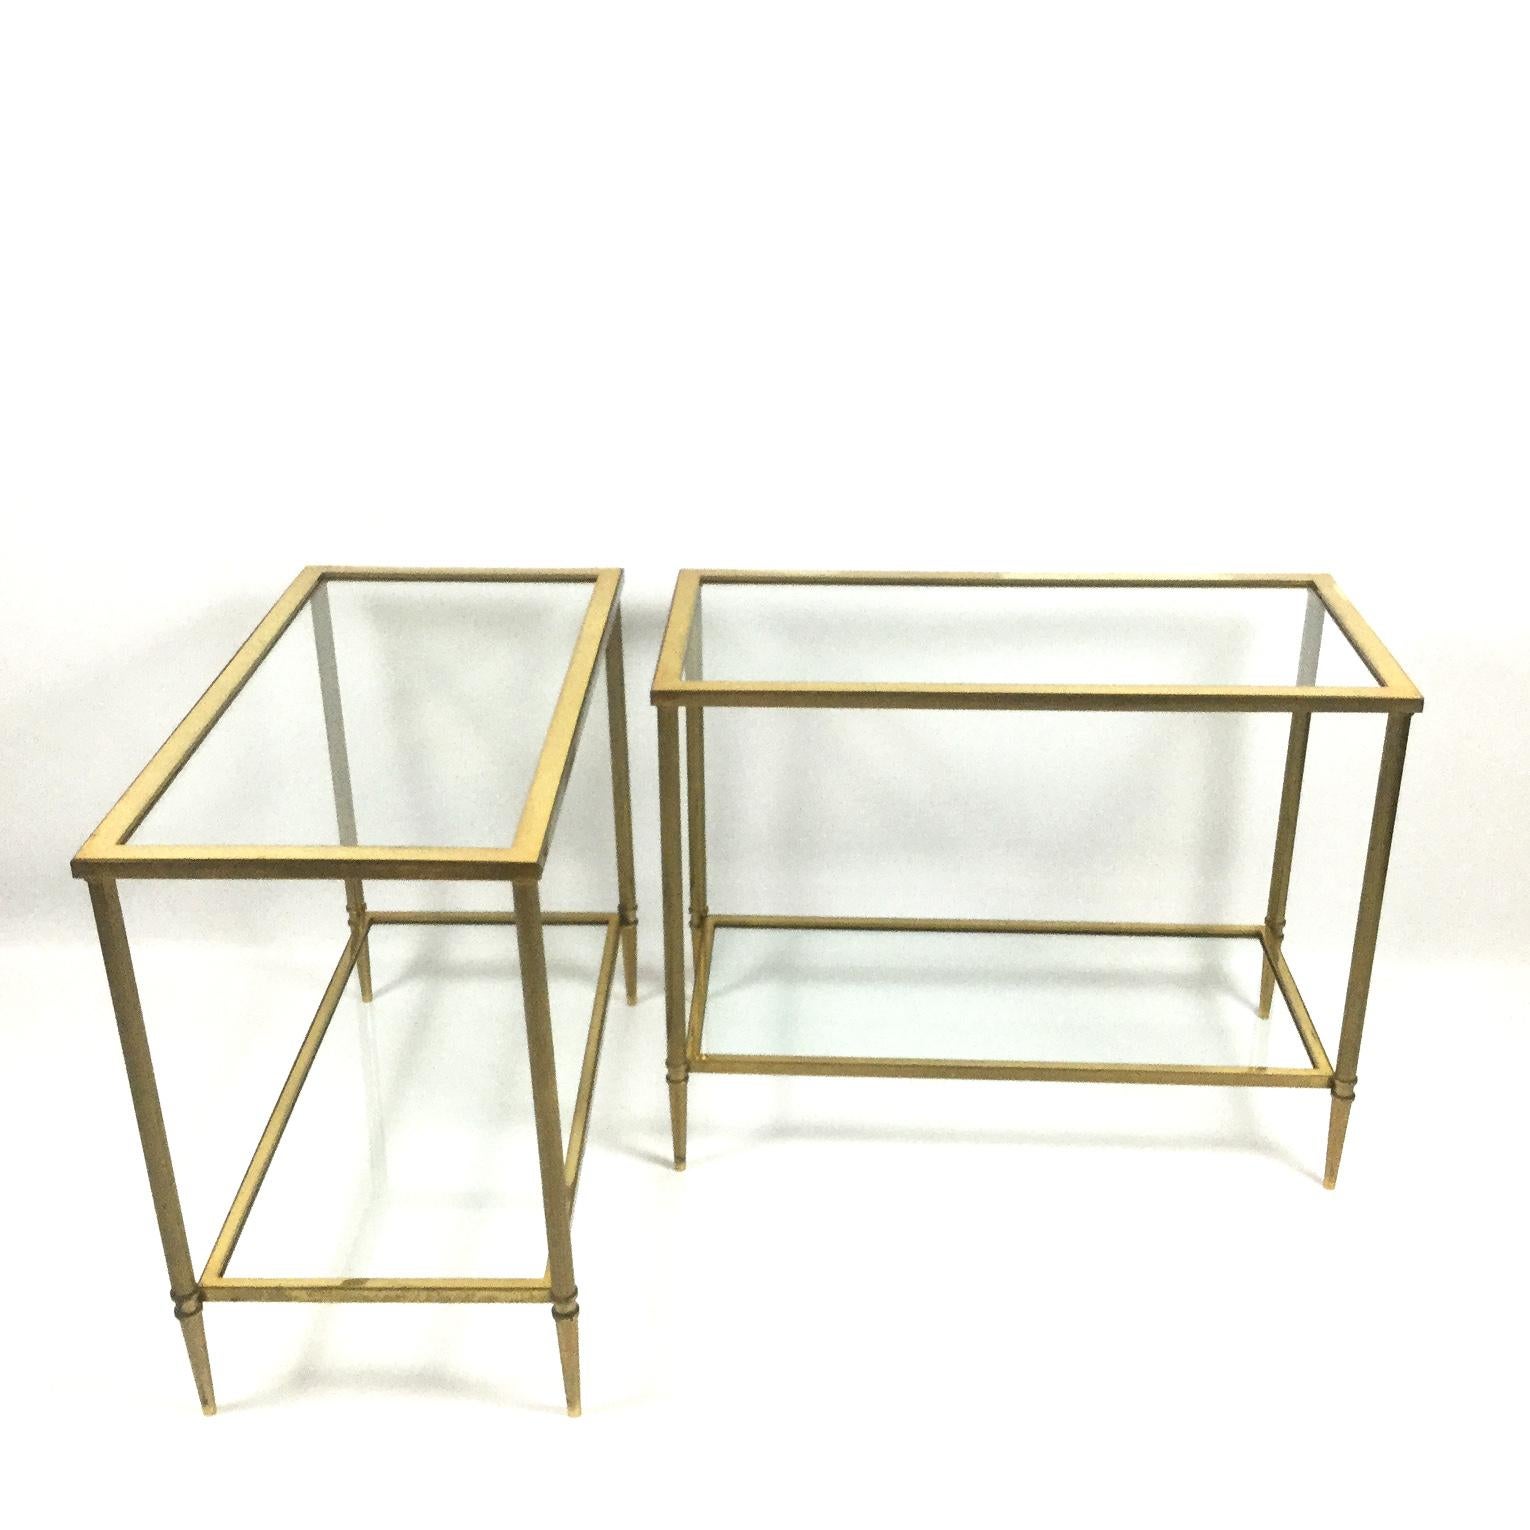 Pair of brass quality console tables with his own original glass shelves
Attributed to Maison Jansen.